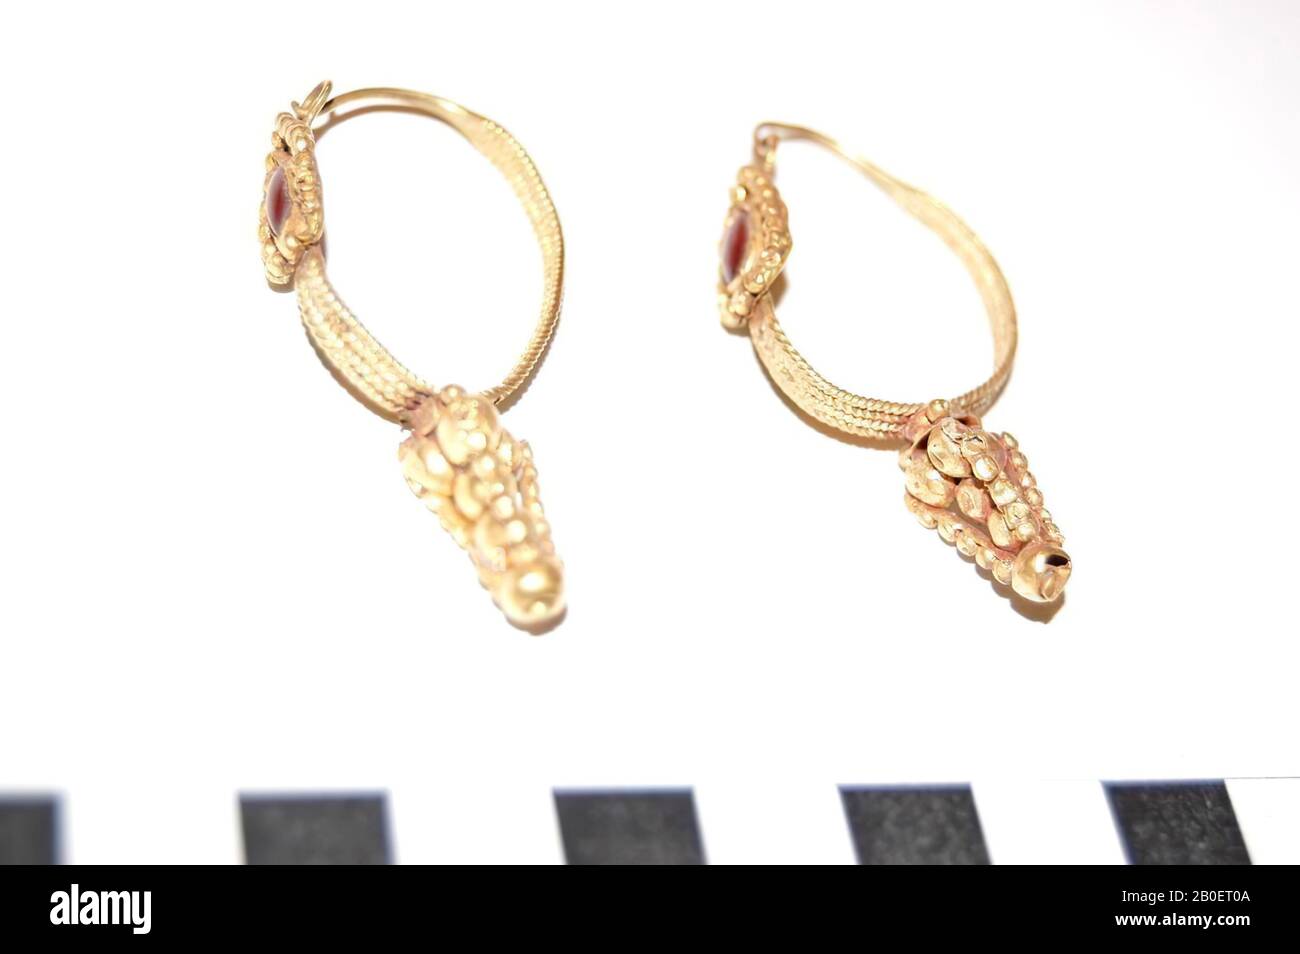 A pair of earrings with almond-shaped garnet, pendant with a pyramid of golden balls, ornament, metal, gold, stone, garnet, L 4.9 cm, Roman Period 200-300 AD, Syria Stock Photo